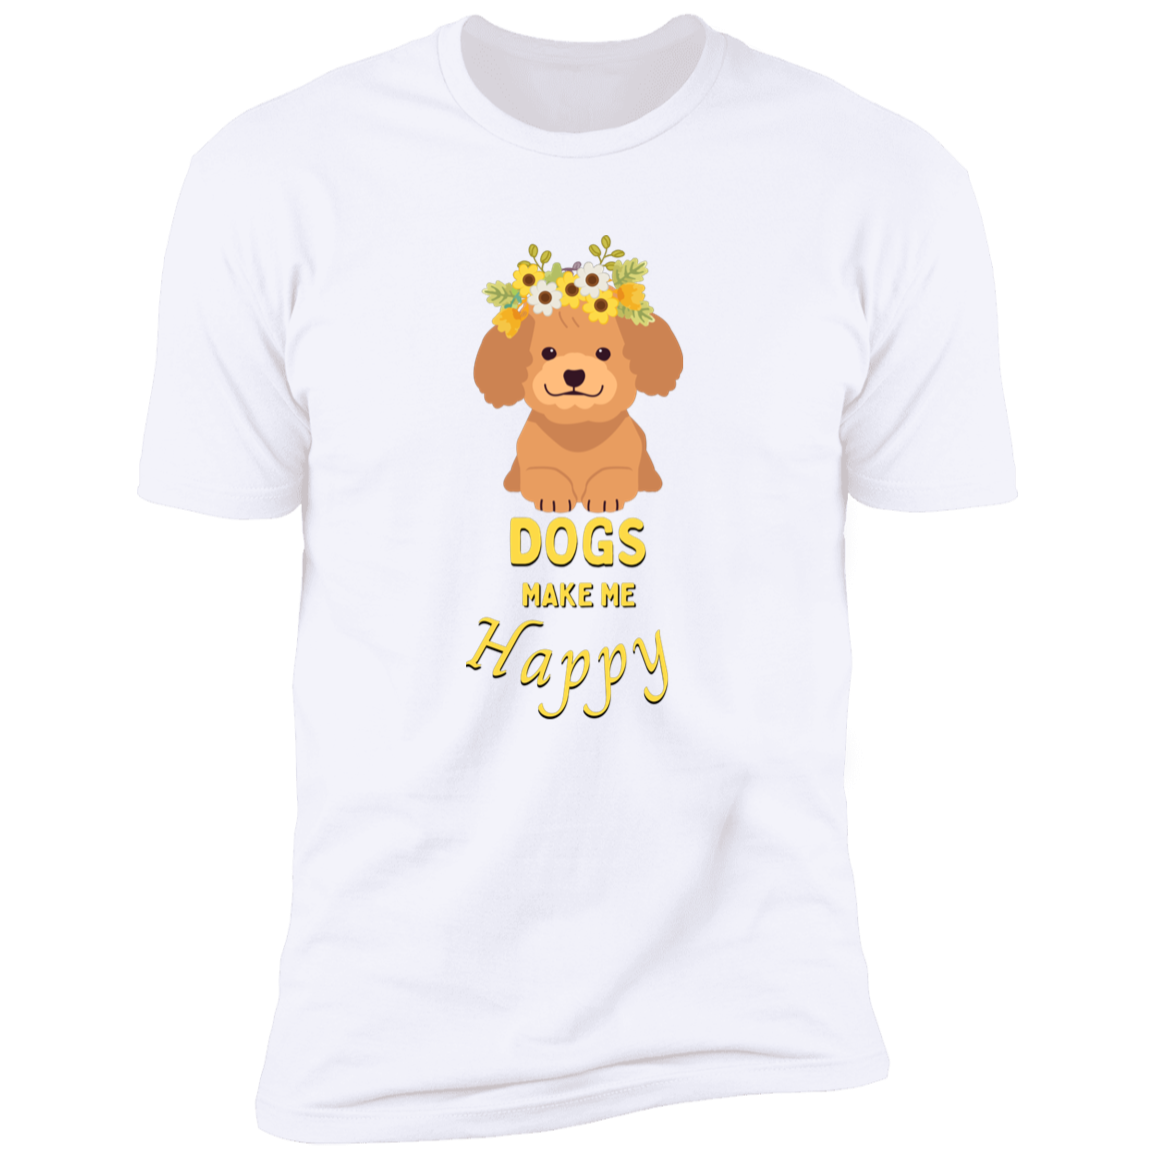 Dogs Make Me Happy t-shirt, funny dog shirt for humans, in white